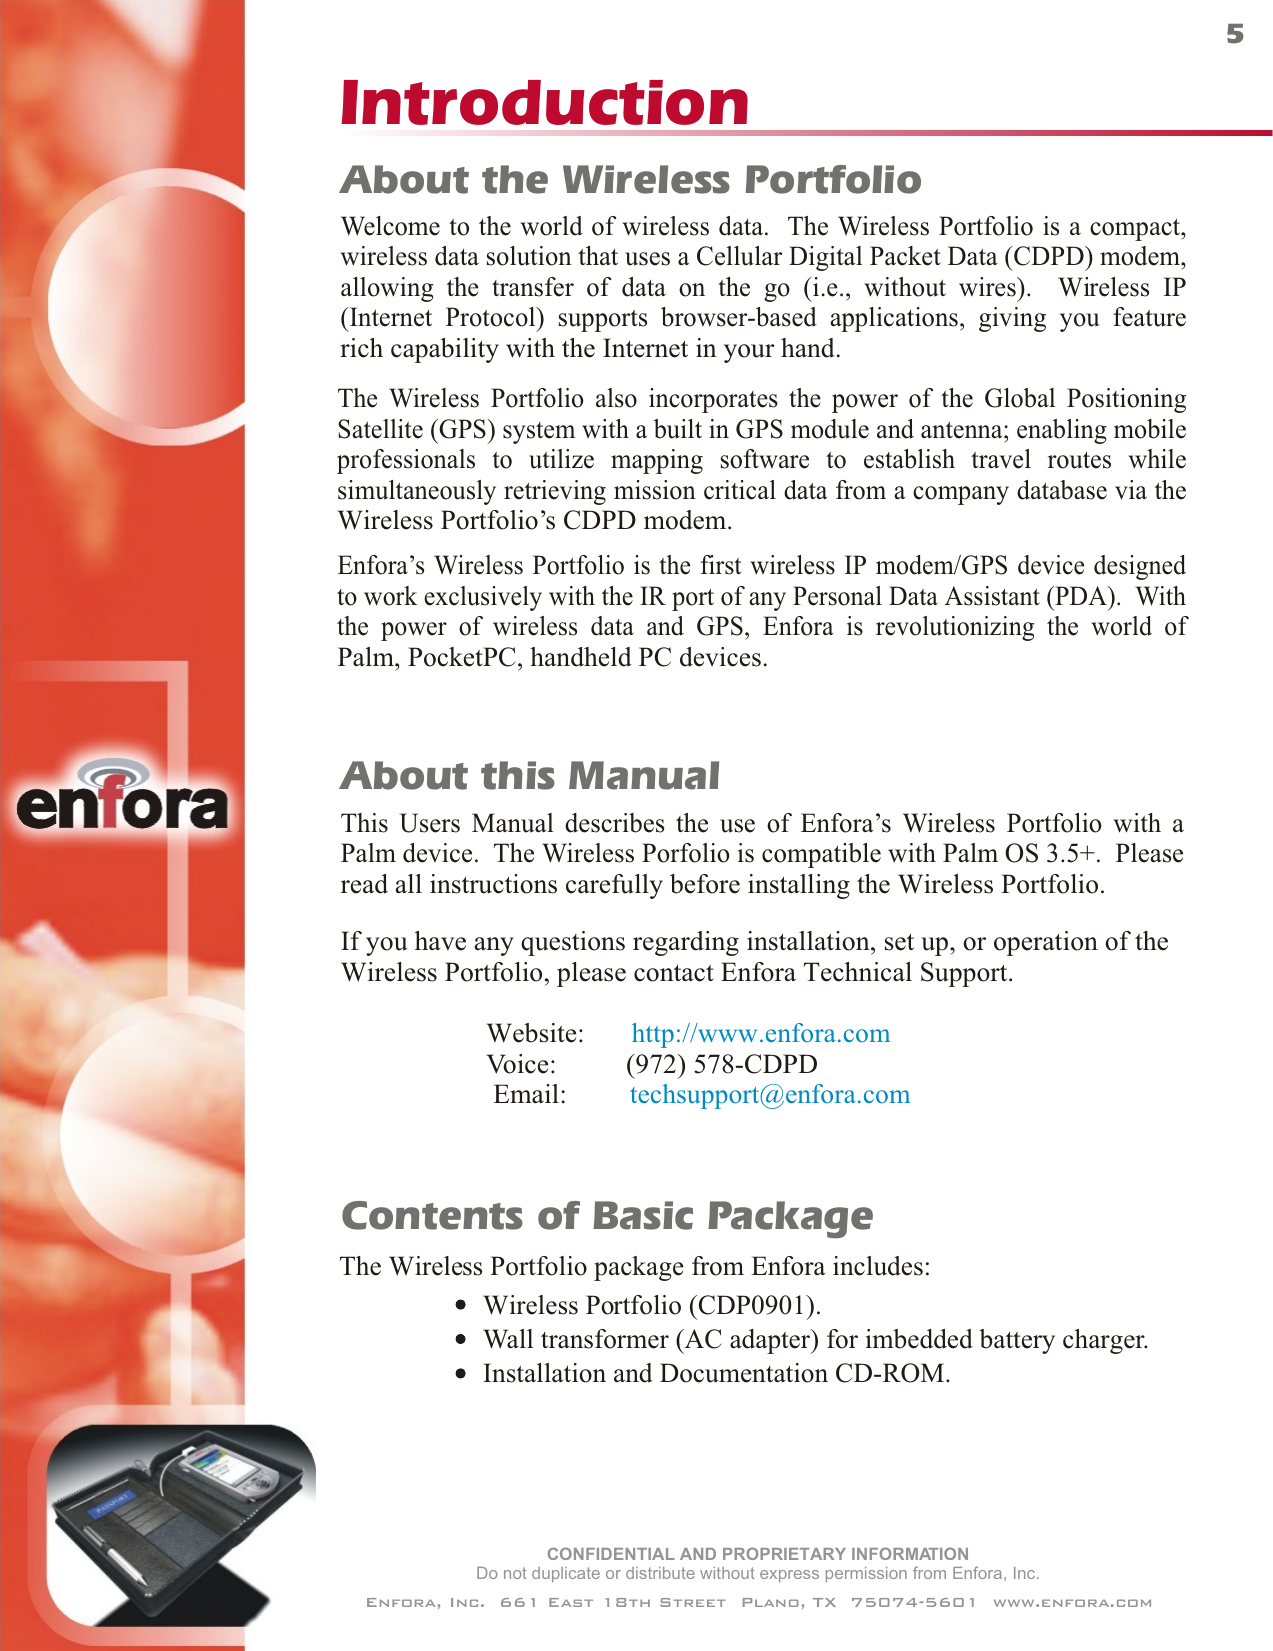 CONFIDENTIAL AND PROPRIETARY INFORMATIONDo not duplicate or distribute without express permission from Enfora, Inc.Enfora, Inc.  661 East 18th Street  Plano, TX  75074-5601  www.enfora.comIntroduction5Contents of Basic PackageThe Wireless Portfolio package from Enfora includes:Wireless Portfolio (CDP0901).Wall transformer (AC adapter) for imbedded battery charger.Installation and Documentation CD-ROM.About the Wireless PortfolioWelcome to the world of wireless data.  The Wireless Portfolio is a compact,wireless data solution that uses a Cellular Digital Packet Data (CDPD) modem,allowing the transfer of data on the go (i.e., without wires).  Wireless IP(Internet Protocol) supports browser-based applications, giving you featurerich capability with the Internet in your hand.The Wireless Portfolio also incorporates the power of the Global PositioningSatellite (GPS) system with a built in GPS module and antenna; enabling mobileprofessionals to utilize mapping software to establish travel routes whilesimultaneously retrieving mission critical data from a company database via theWireless Portfolio’s CDPD modem.Enfora’s Wireless Portfolio is the first wireless IP modem/GPS device designedto work exclusively with the IR port of any Personal Data Assistant (PDA).  Withthe power of wireless data and GPS, Enfora is revolutionizing the world ofPalm, PocketPC, handheld PC devices. This Users Manual describes the use of Enfora’s Wireless Portfolio with aPalm device.  The Wireless Porfolio is compatible with Palm OS 3.5+.  PleaseIf you have any questions regarding installation, set up, or operation of theWireless Portfolio, please contact Enfora Technical Support.                     Website:                            Voice:          (972) 578-CDPD                      Email:         http://www.enfora.comtechsupport@enfora.comAbout this Manualread all instructions carefully before installing the Wireless Portfolio.